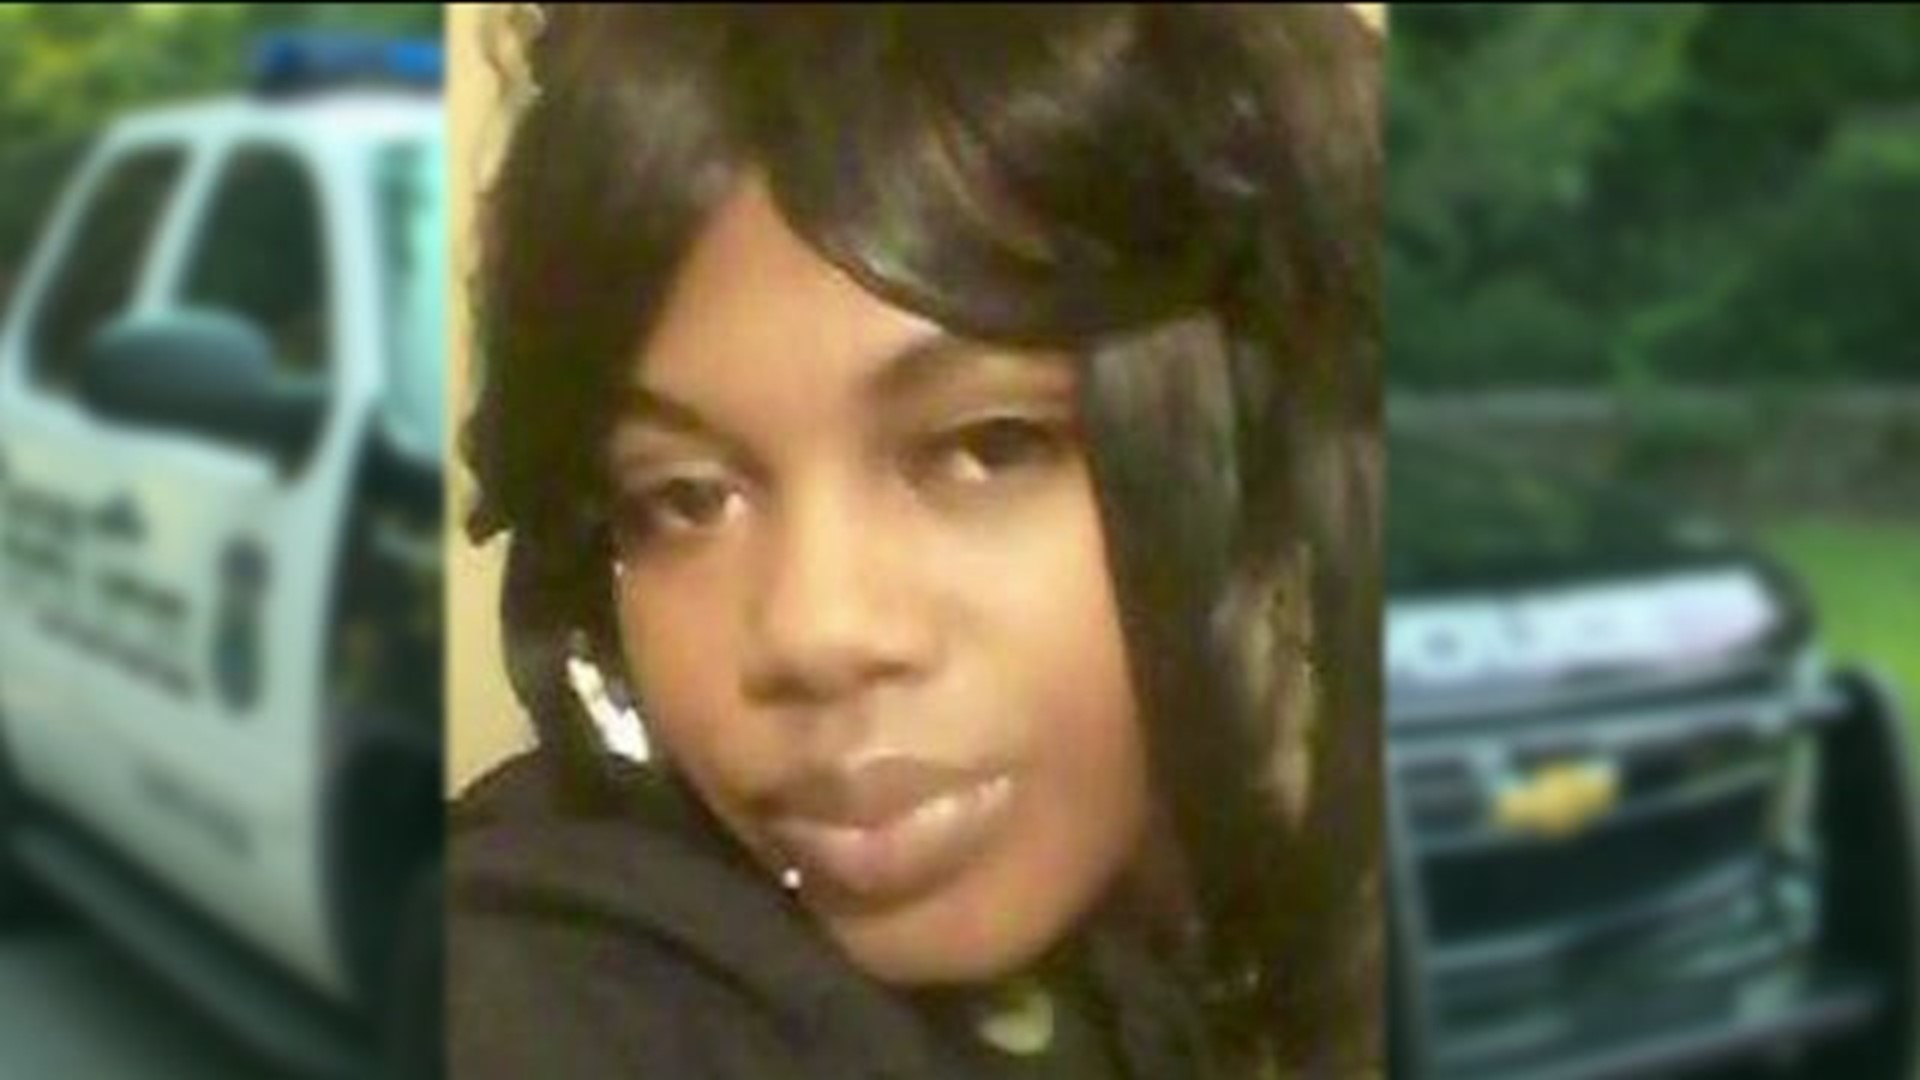 Family mourns as search ends for missing Hartford woman